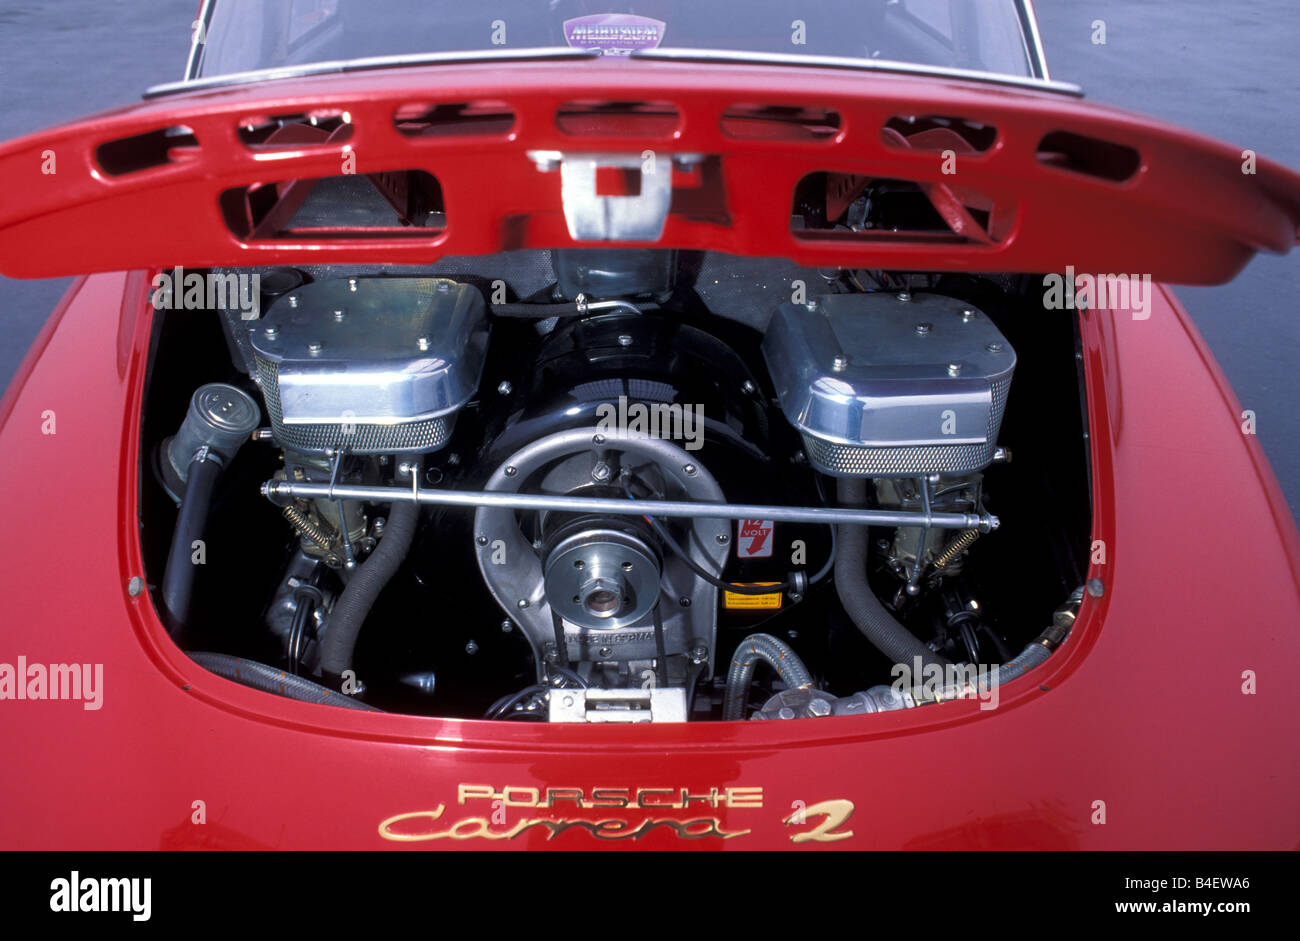 Car, Porsche 356 Carrera 2, model year 1963, red, sports car, Coupé, Coupe,  red, vintage car, 1960s, sixties, engine compartment Stock Photo - Alamy